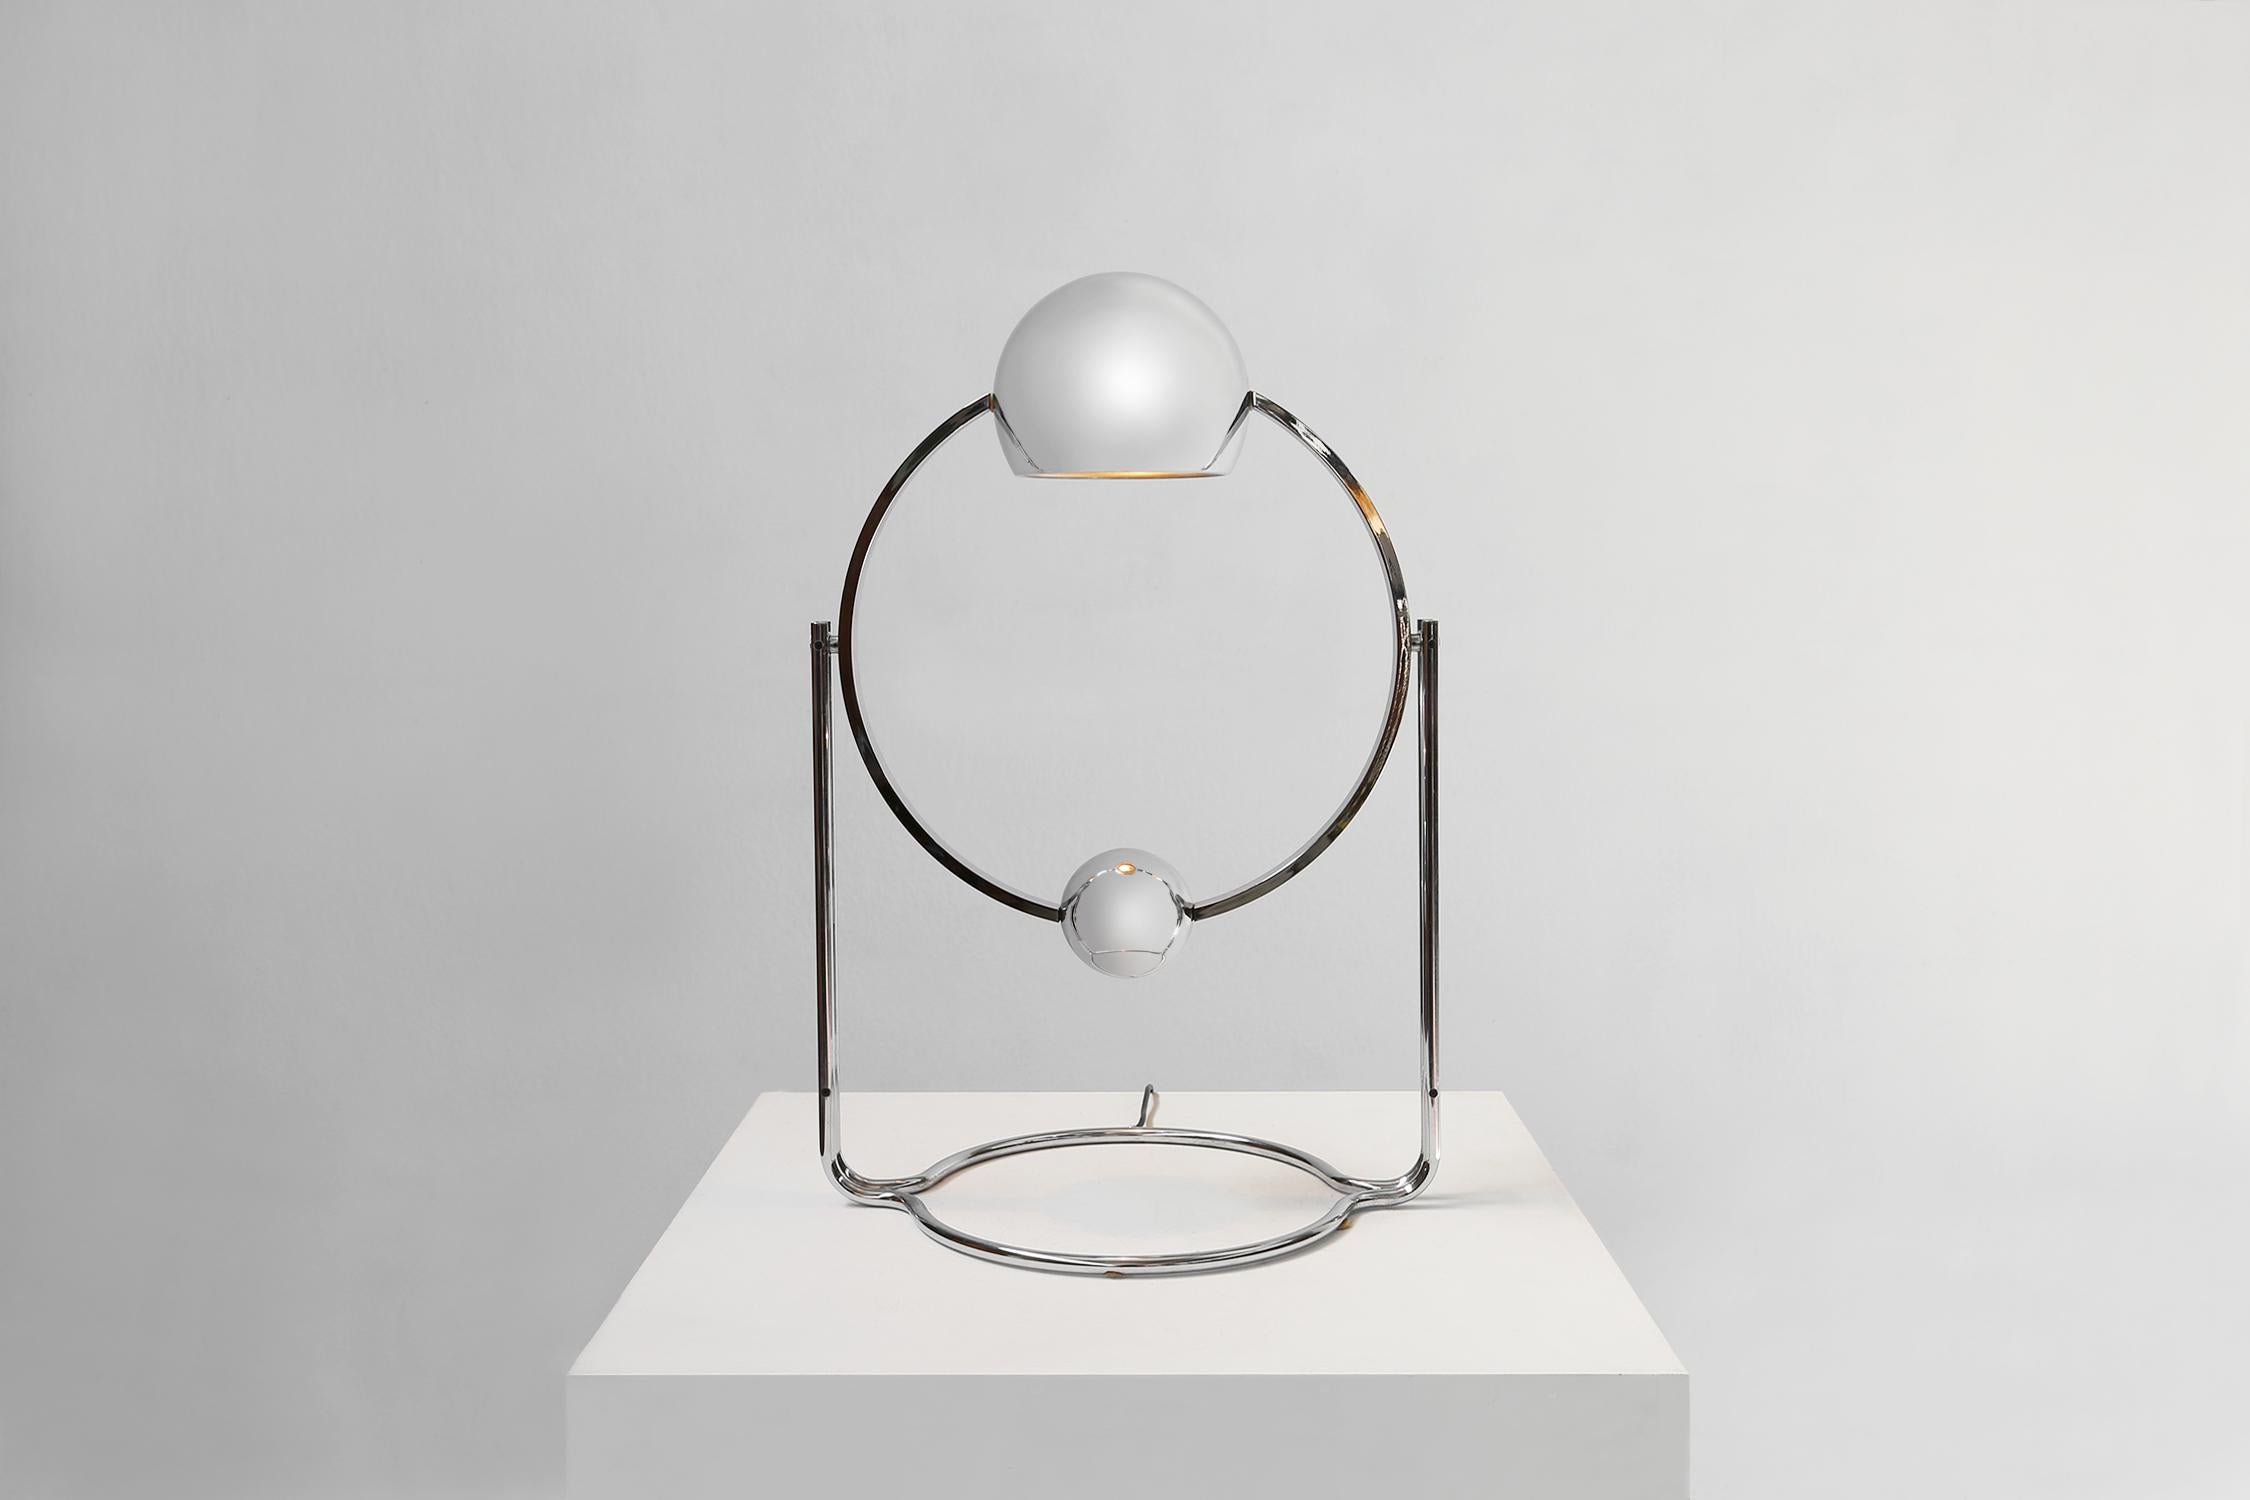 French avangarde lamp designed by Pierre Soulié model 10432.
This model was made of chromed metal around 1970 by the company Verre Lumière edition.